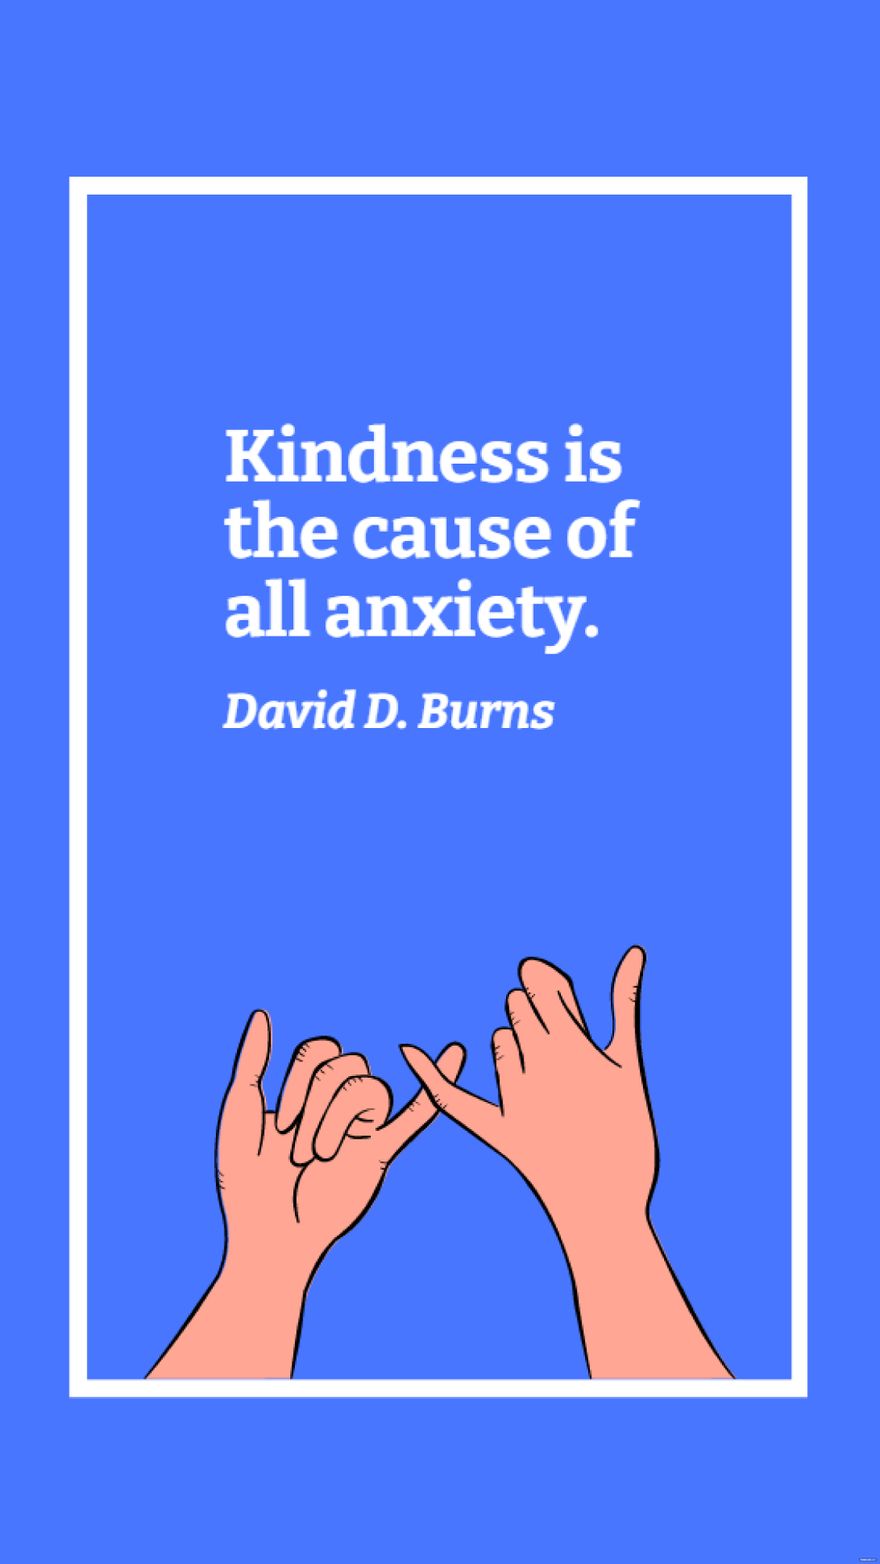 Free David D. Burns - Kindness is the cause of all anxiety. in JPG